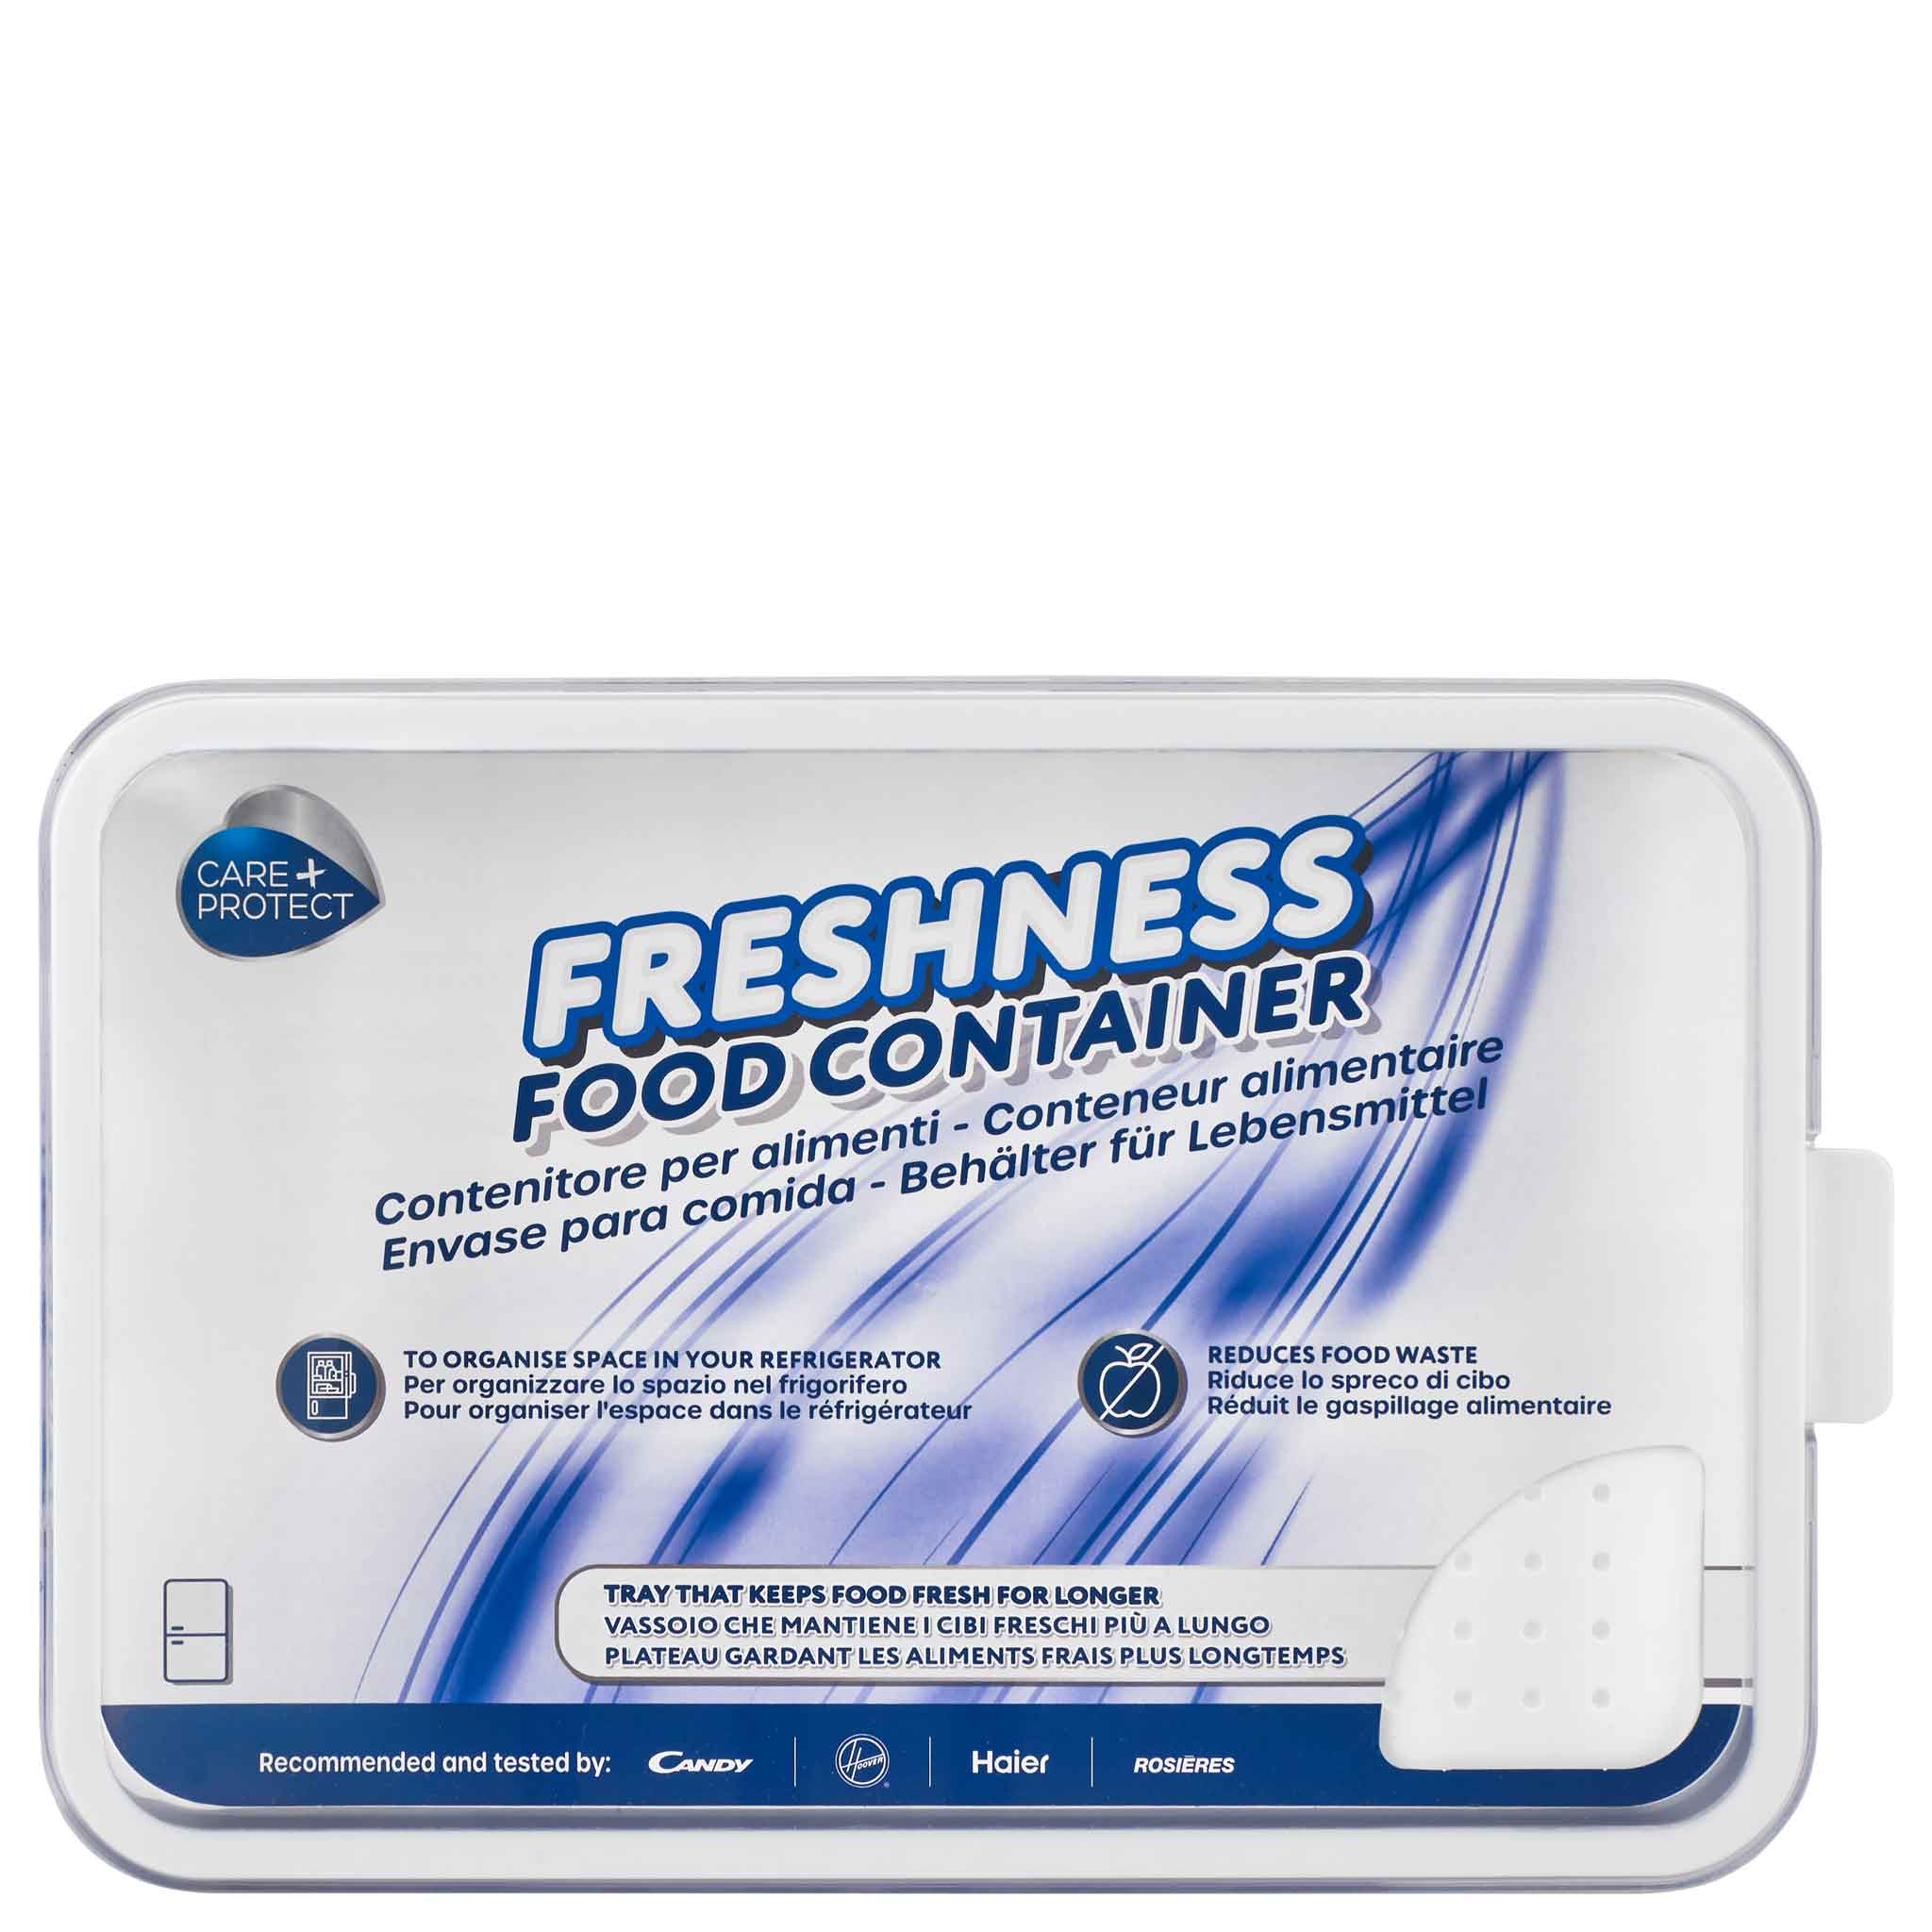 Freshness Food Container, 2.6l